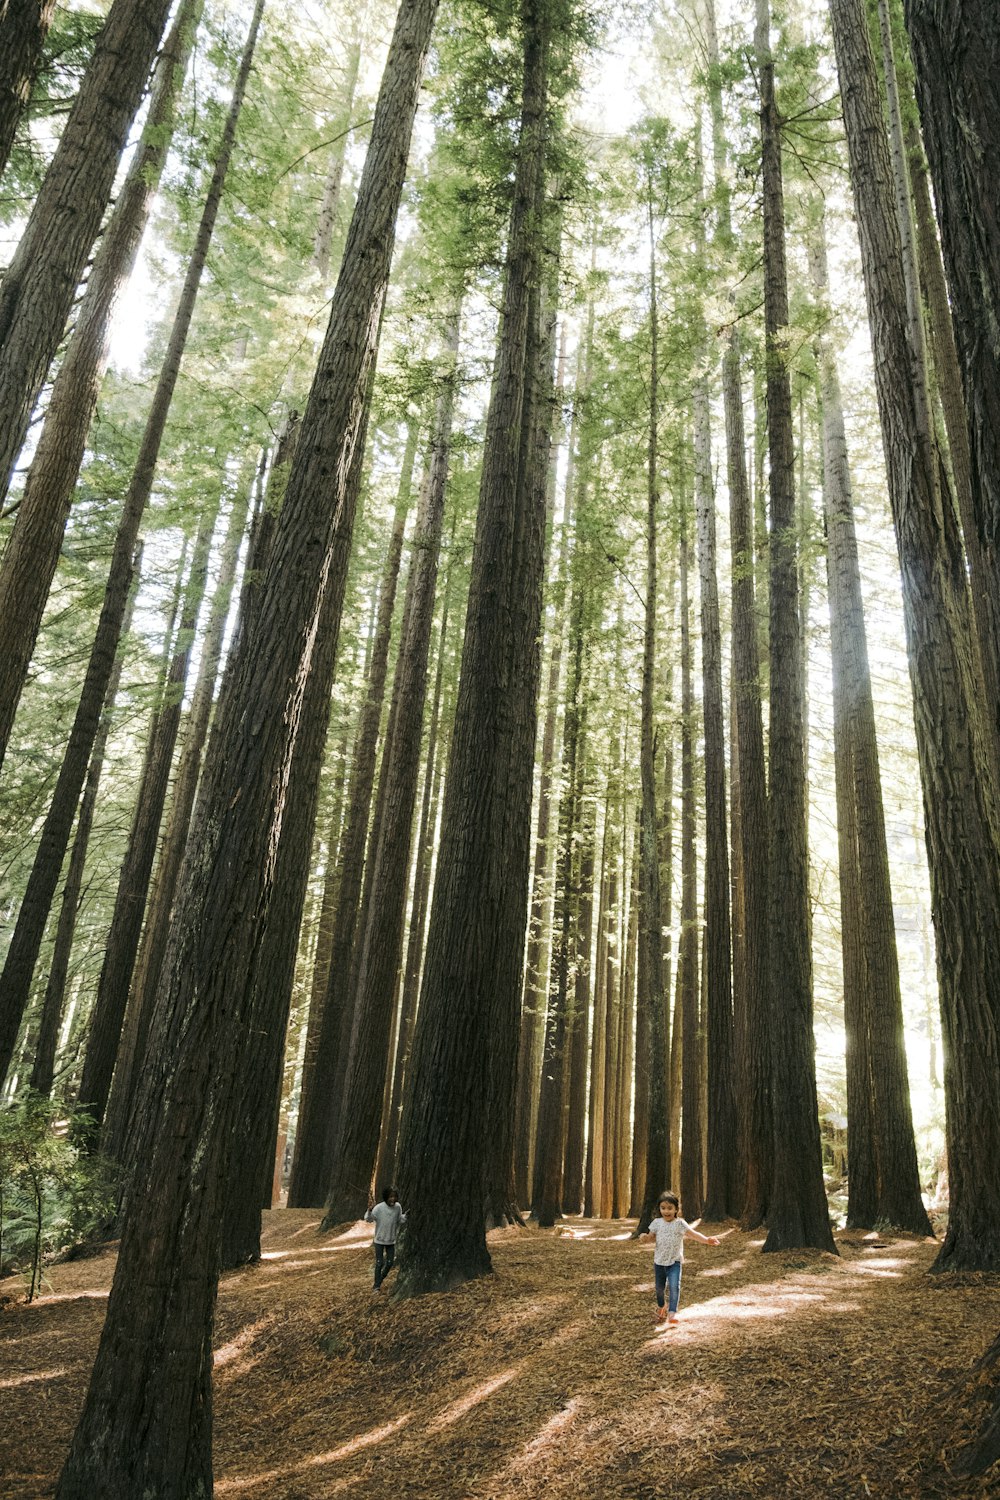 a group of people walking through a forest filled with tall trees